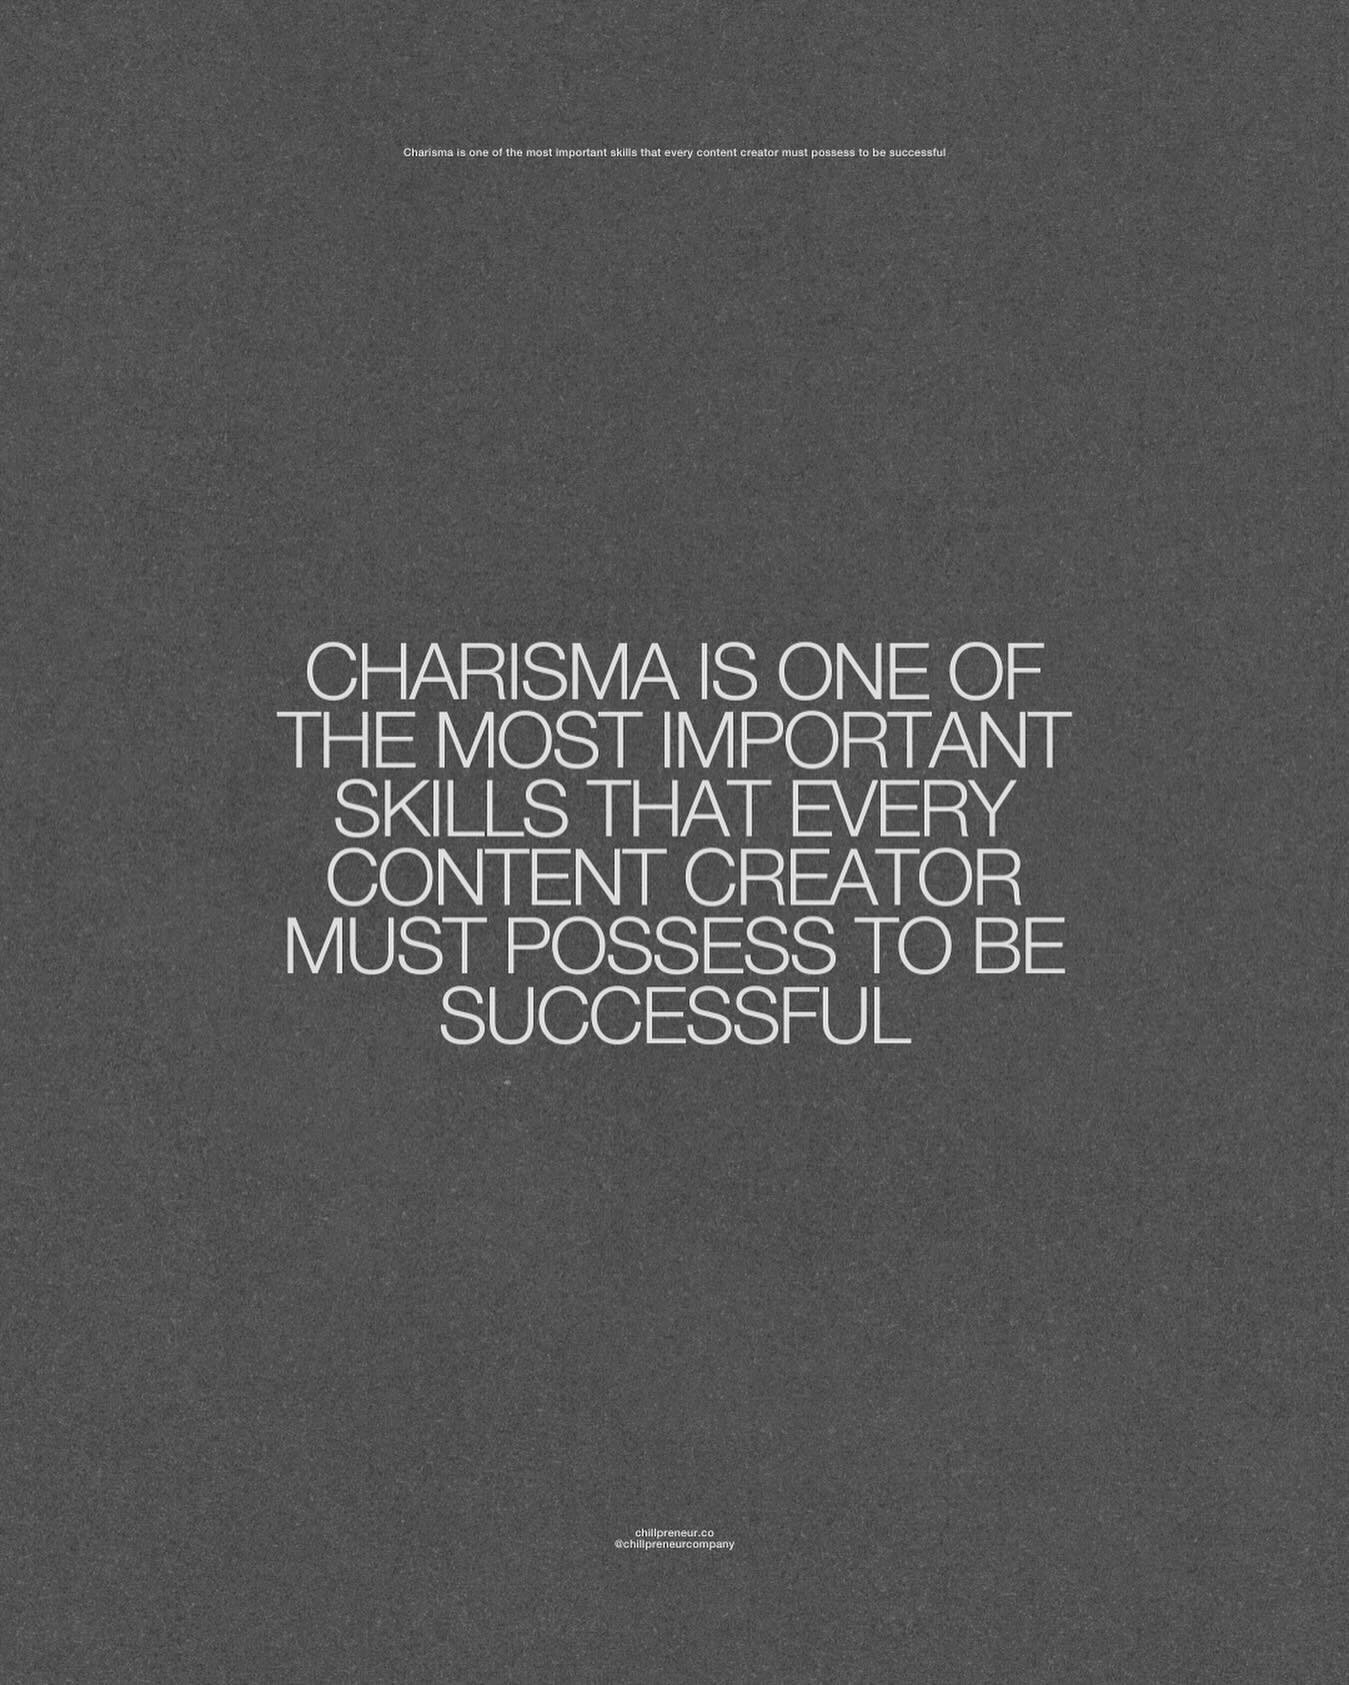 But here is the thing about Charisma... It&rsquo;s not what you think it is.

Charisma is not about smooth talking or slick energy.

Charisma is nothing more than someone who has the unwavering confidence to be themselves.

Awkward can be charismatic